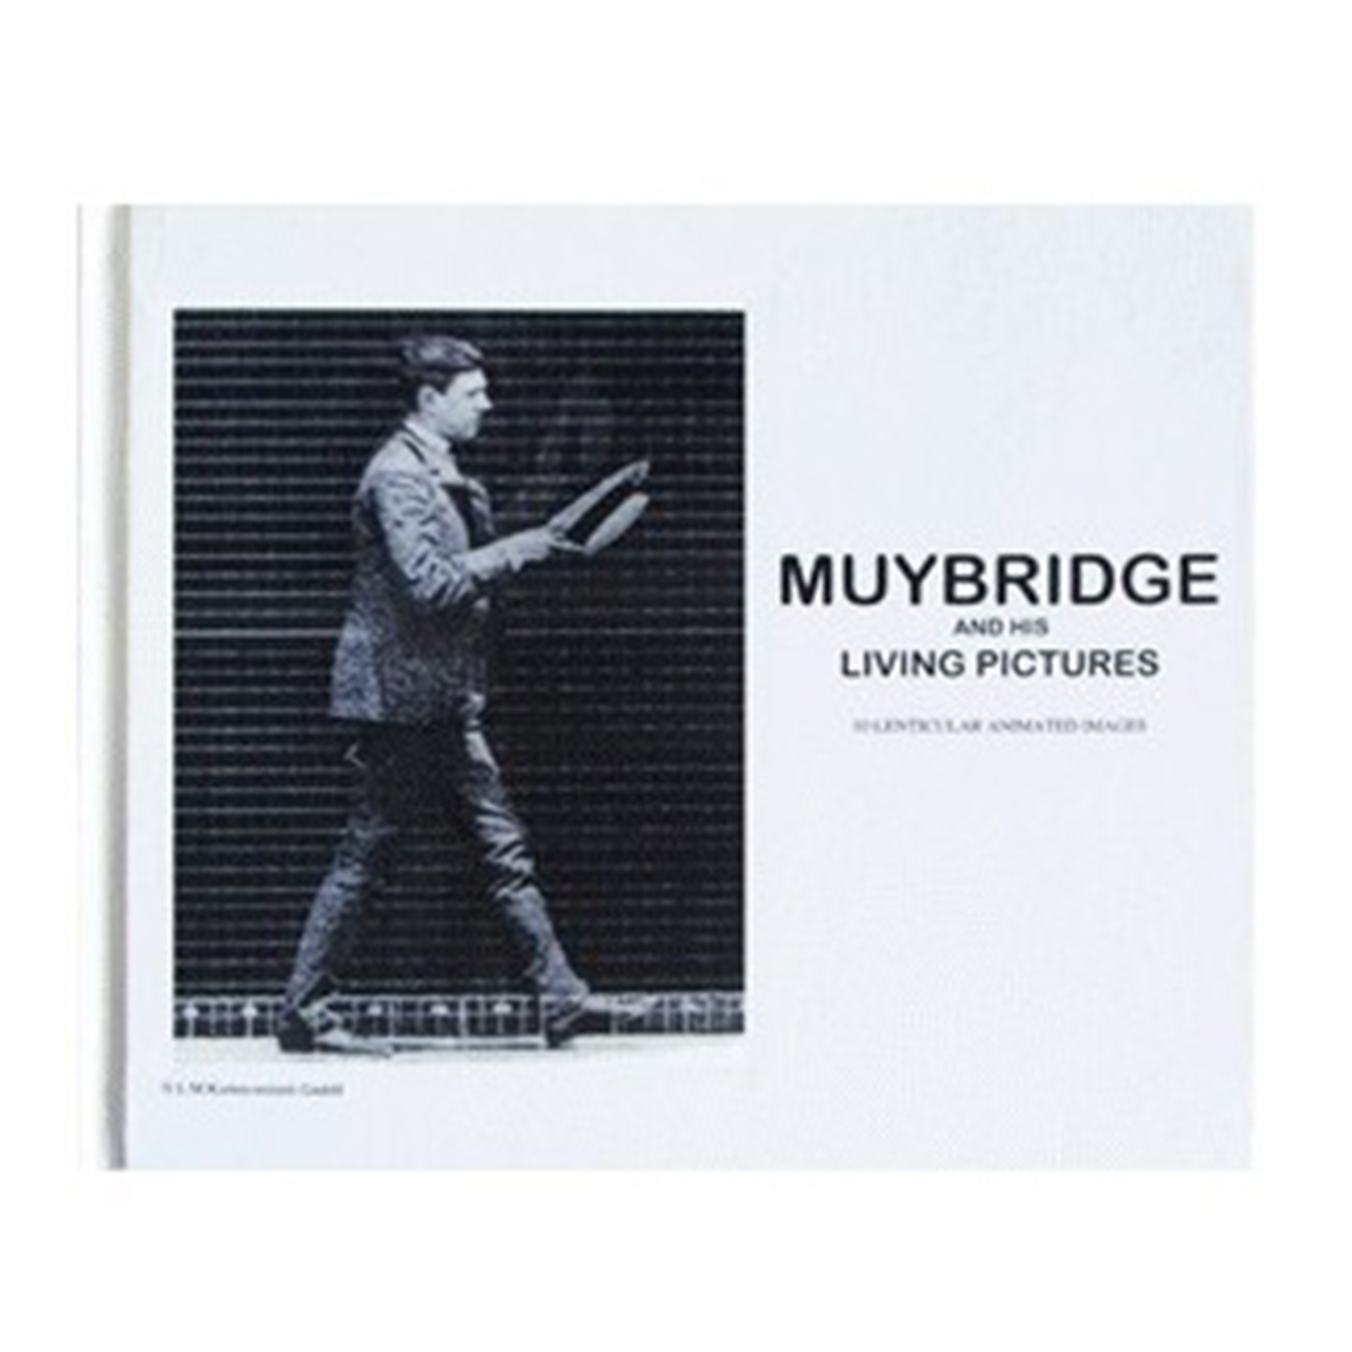 muybridge-and his-living-pictures